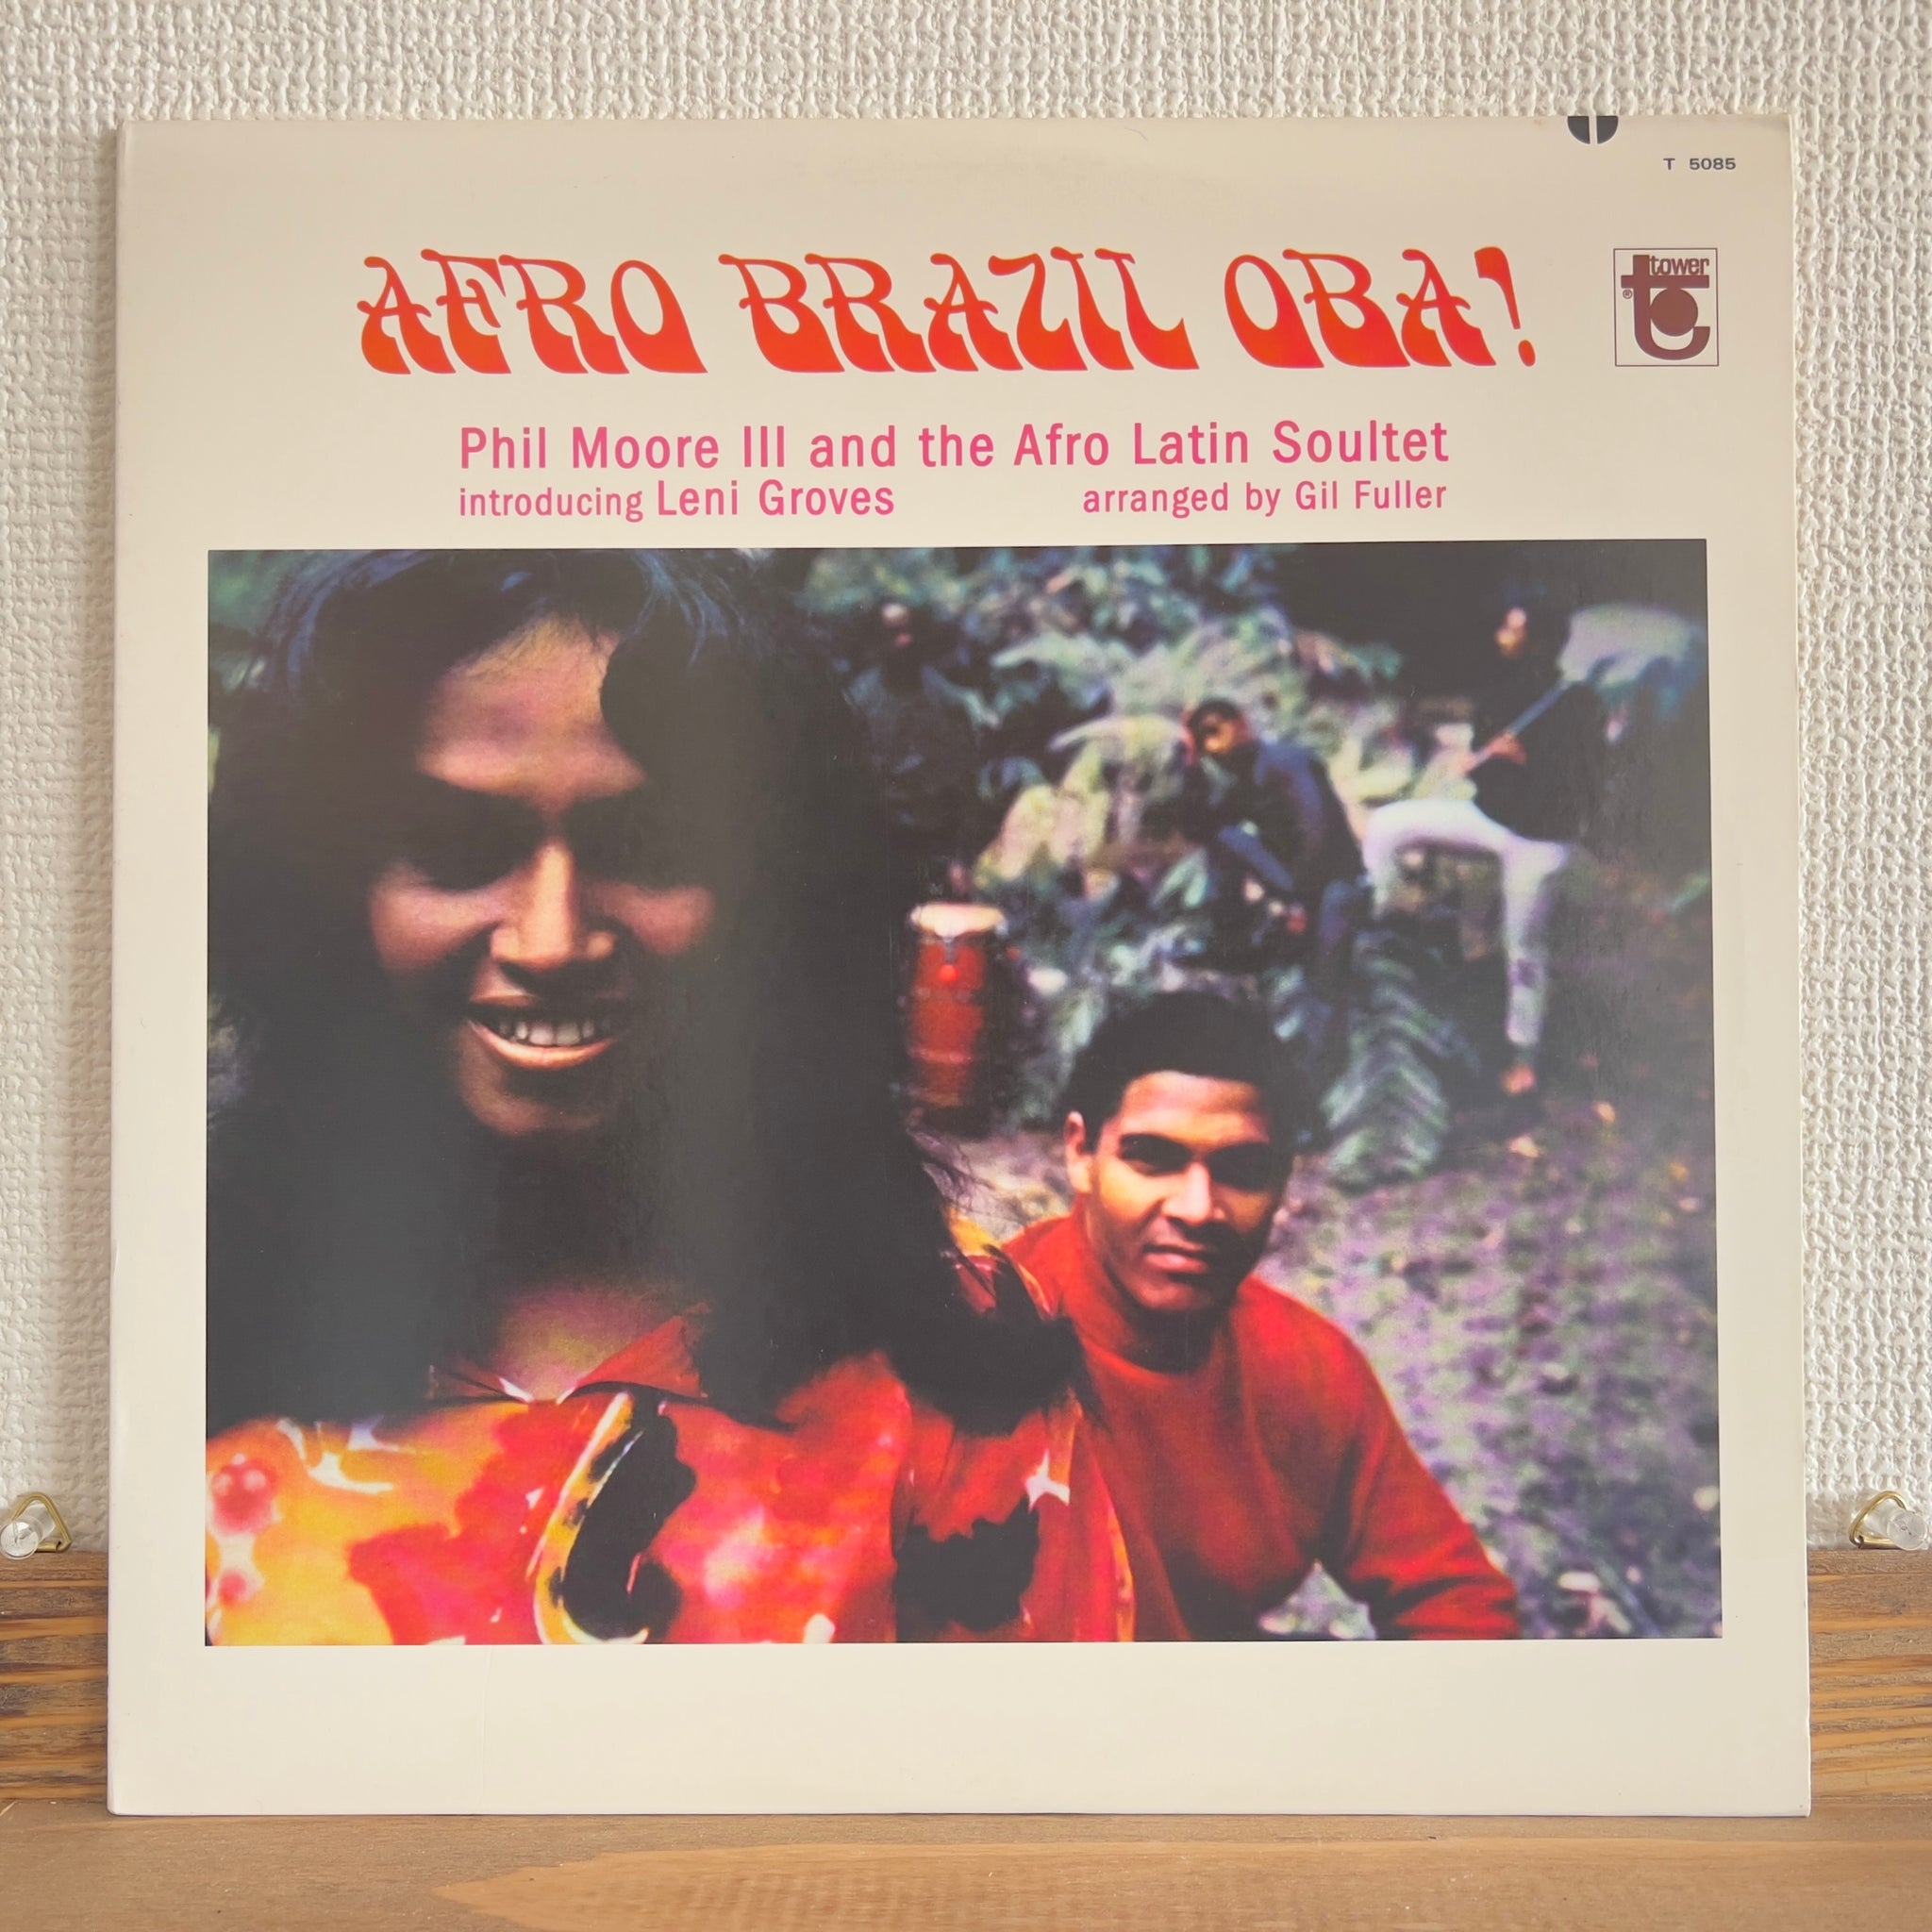 Phil Moore III And The Afro Latin Soultet Introducing Leni Groves – Afro Brazil Oba!